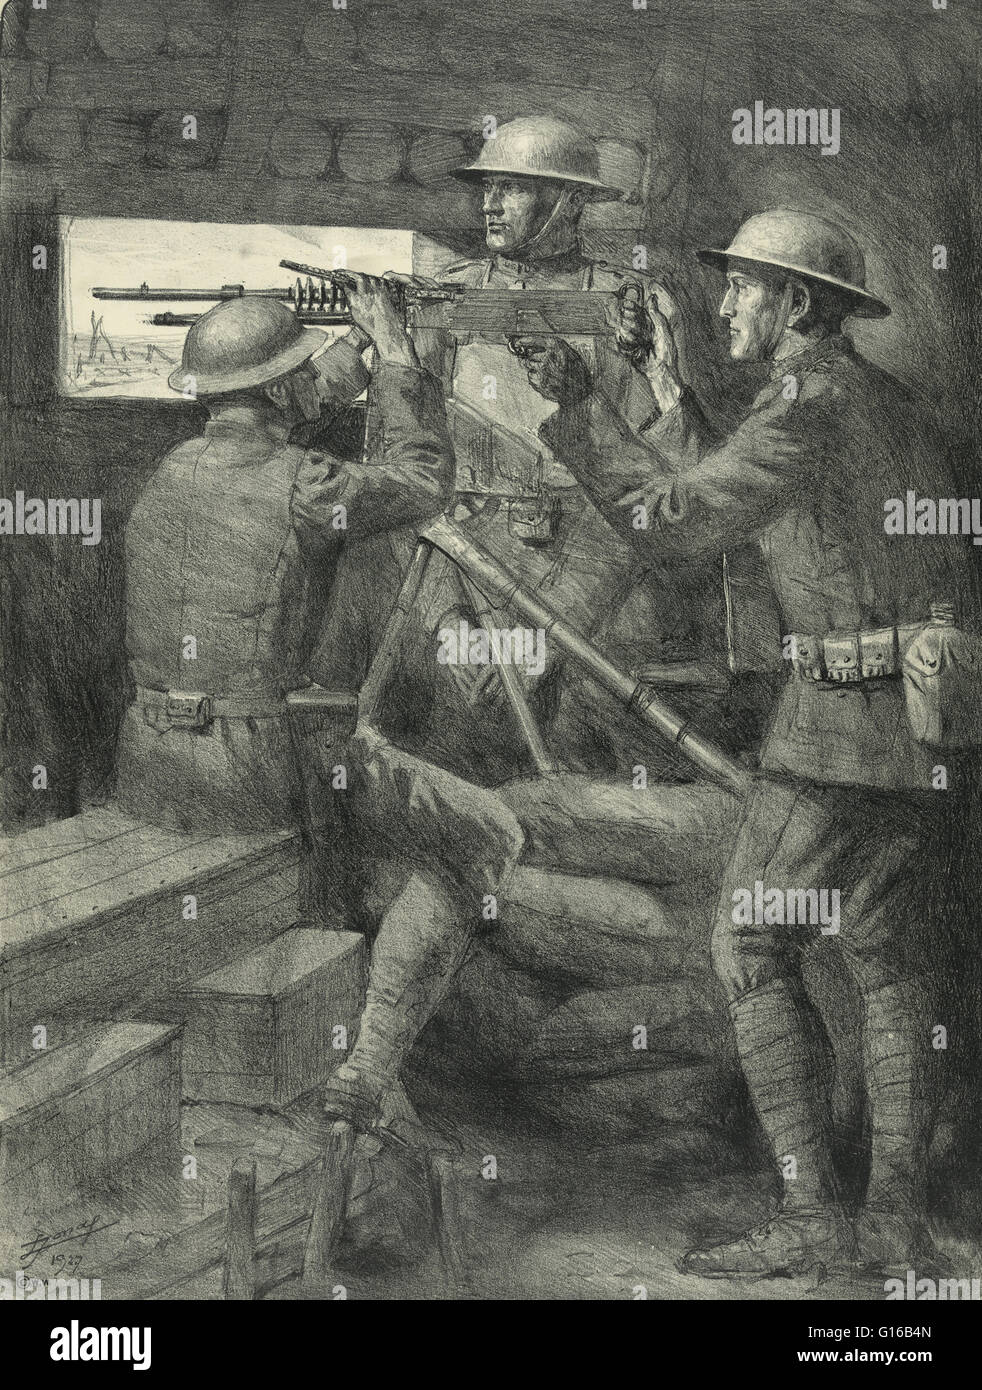 Entitled: A machine gun emplacement in the old Verdun trenches. Sketch of soldiers aiming a machine gun through a bunker window in World War I. Verdun was the site of a major battle of the First World War. One of the costliest battles of the war, Verdun e Stock Photo